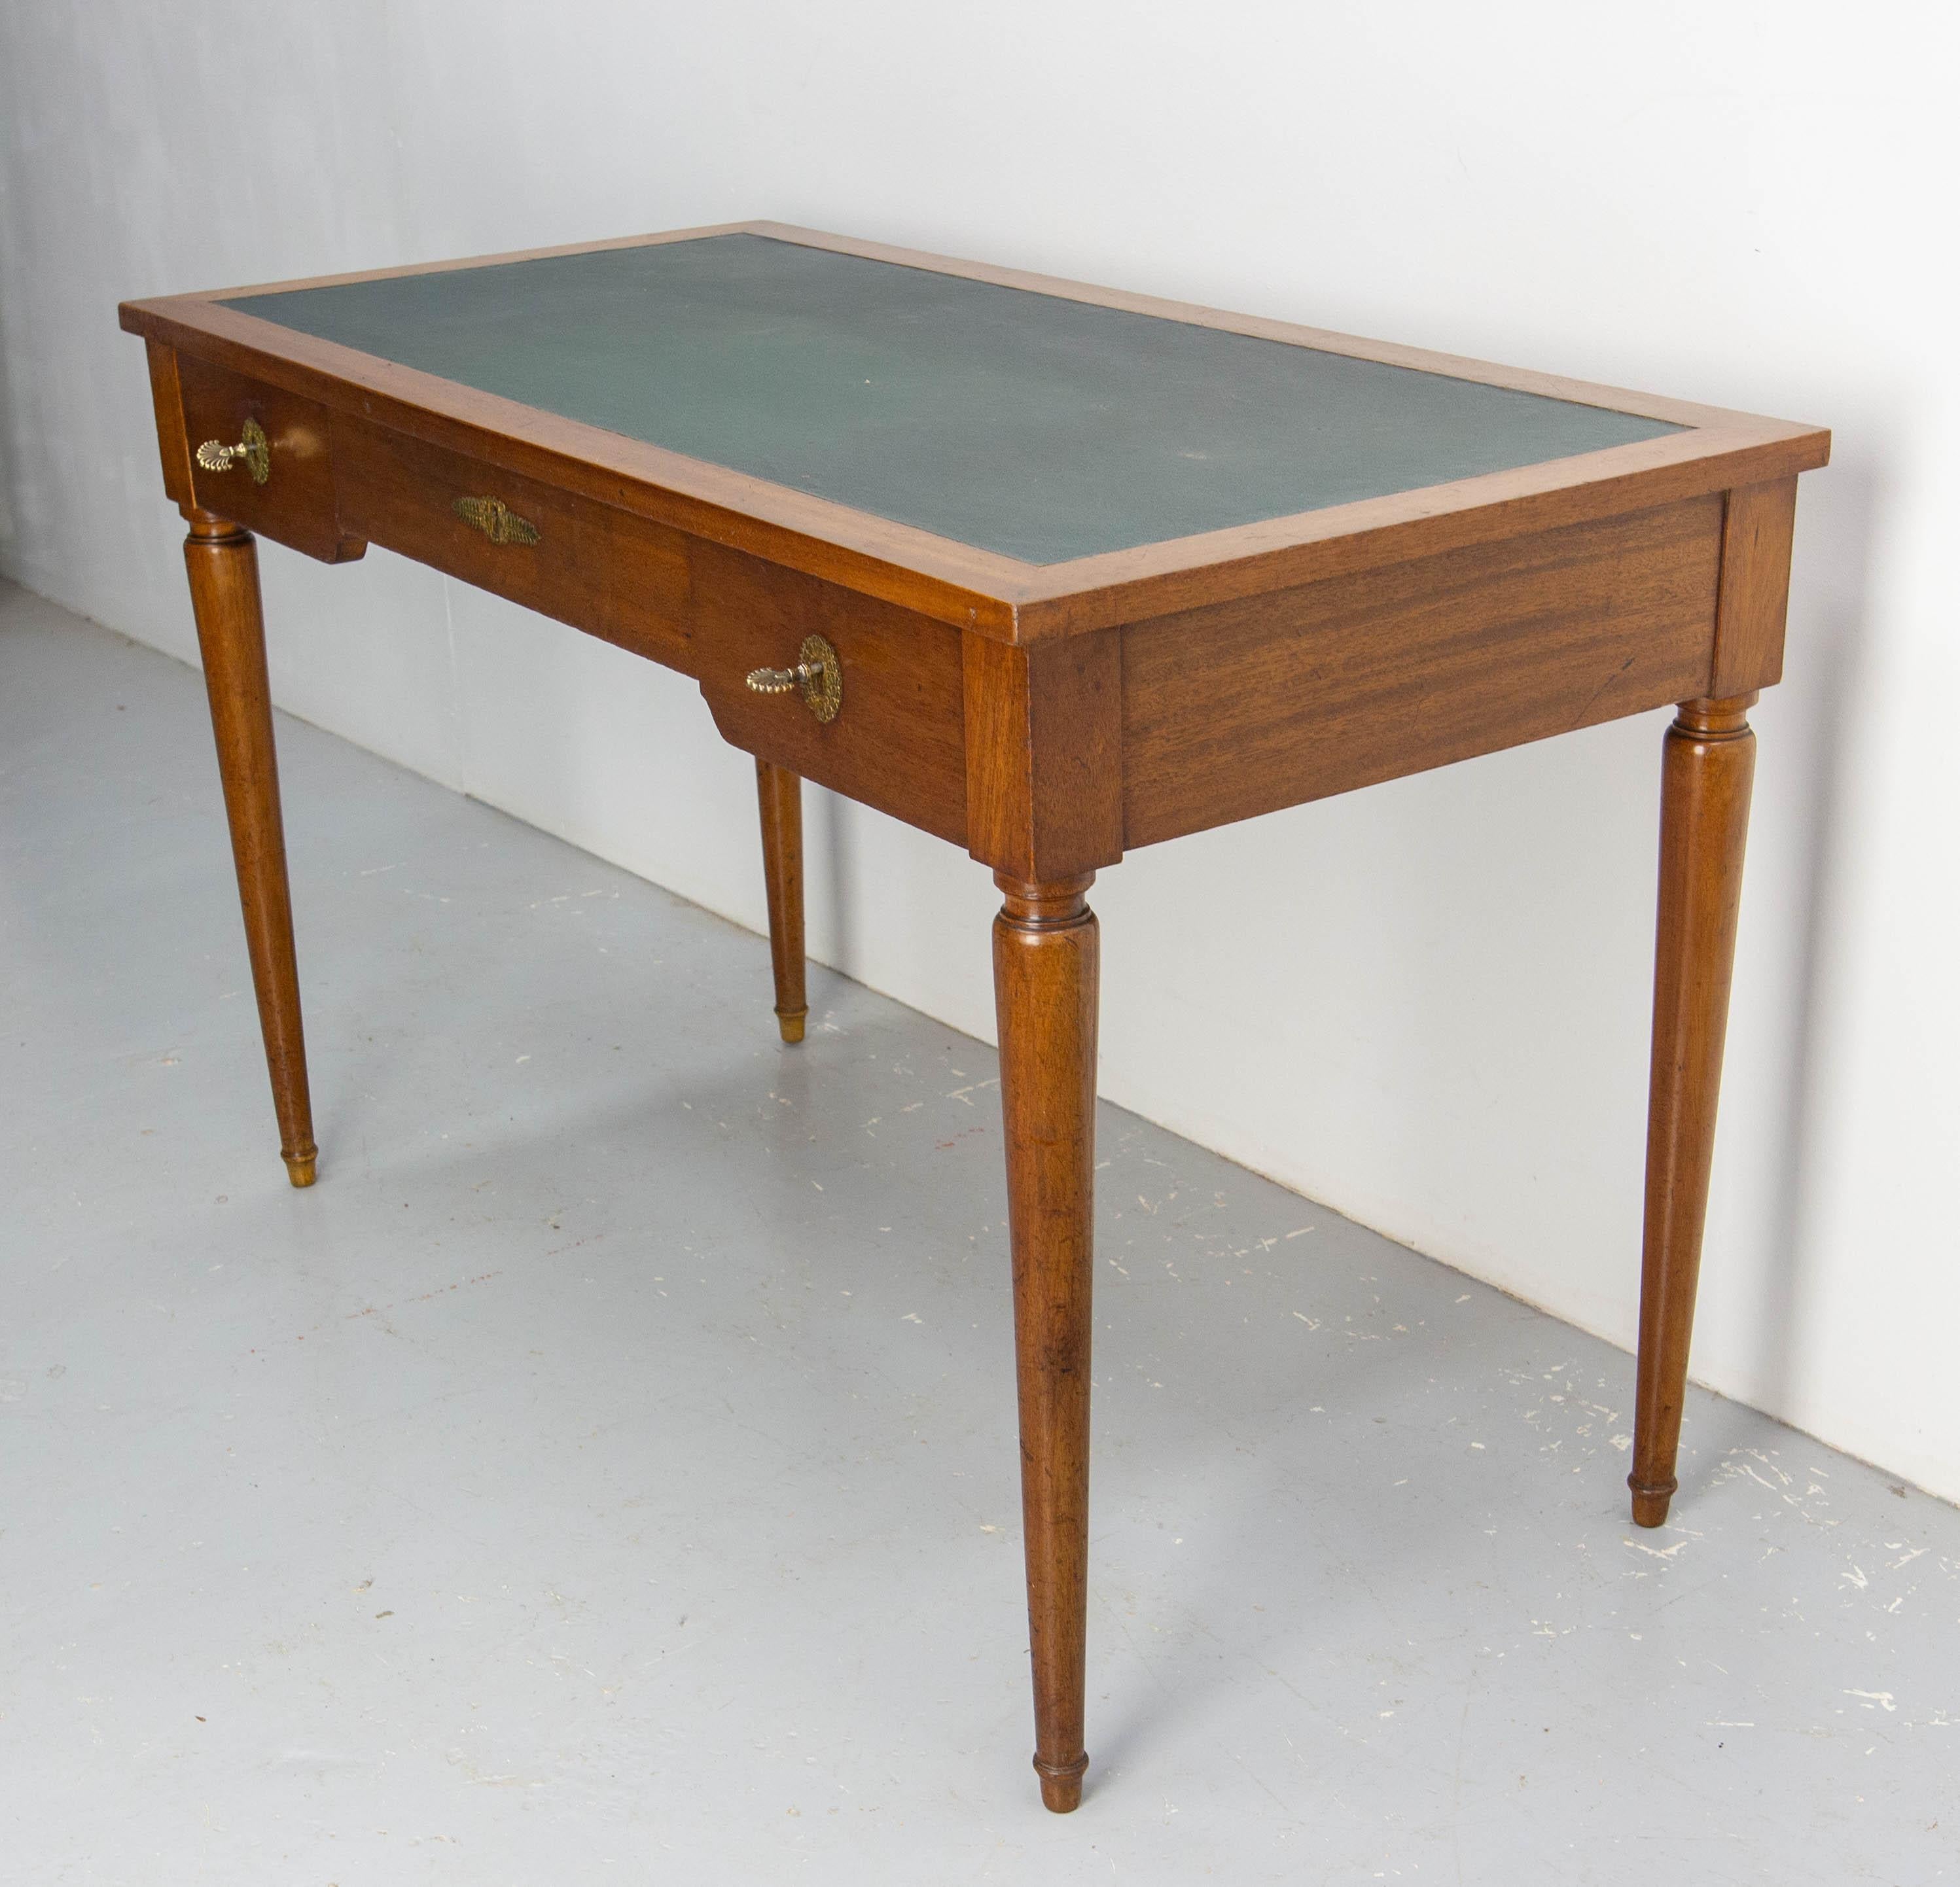 Early 20th Century French Desk Writing Table Empire Style, Mid-Century